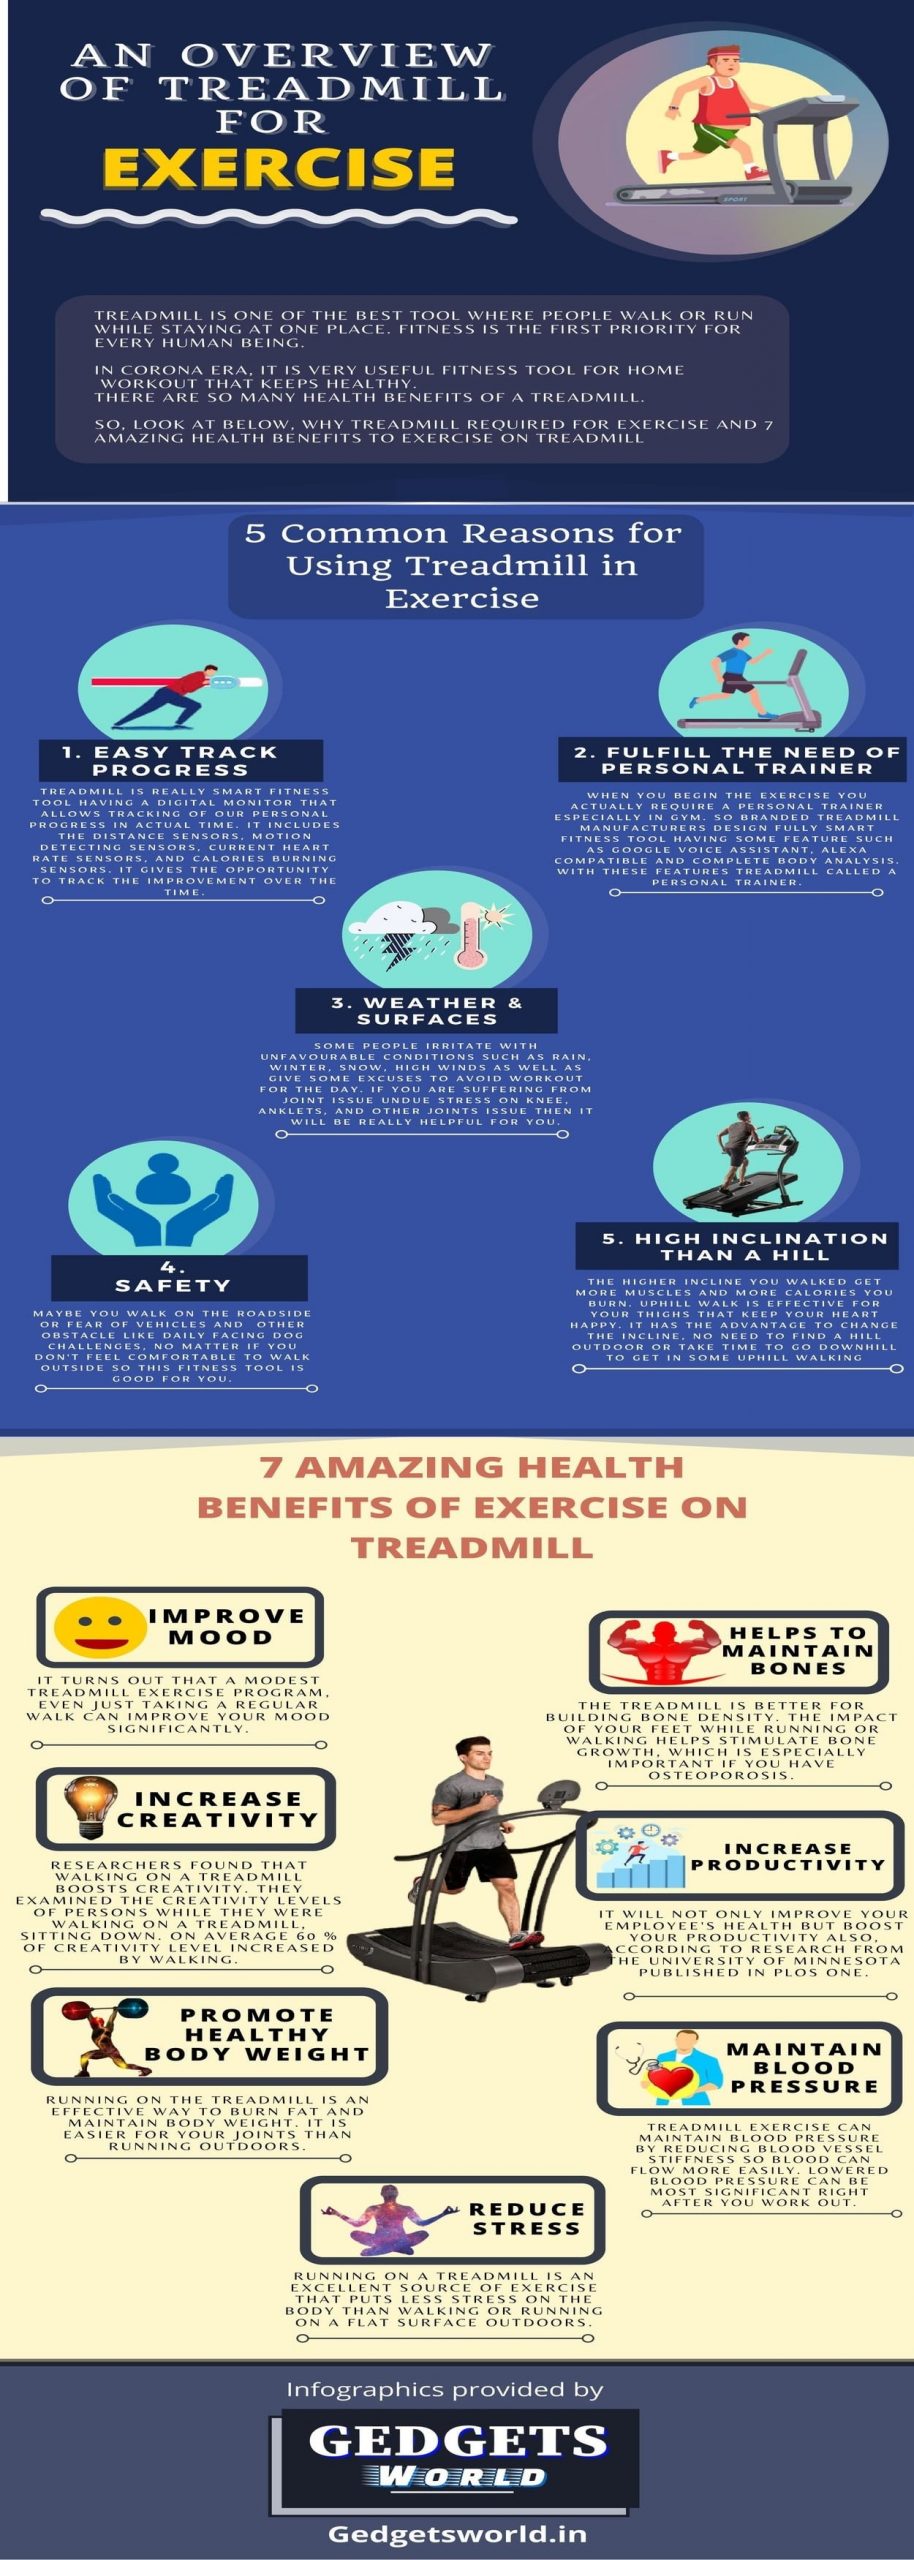 An Overview of the Treadmill for Exercise- Infographics